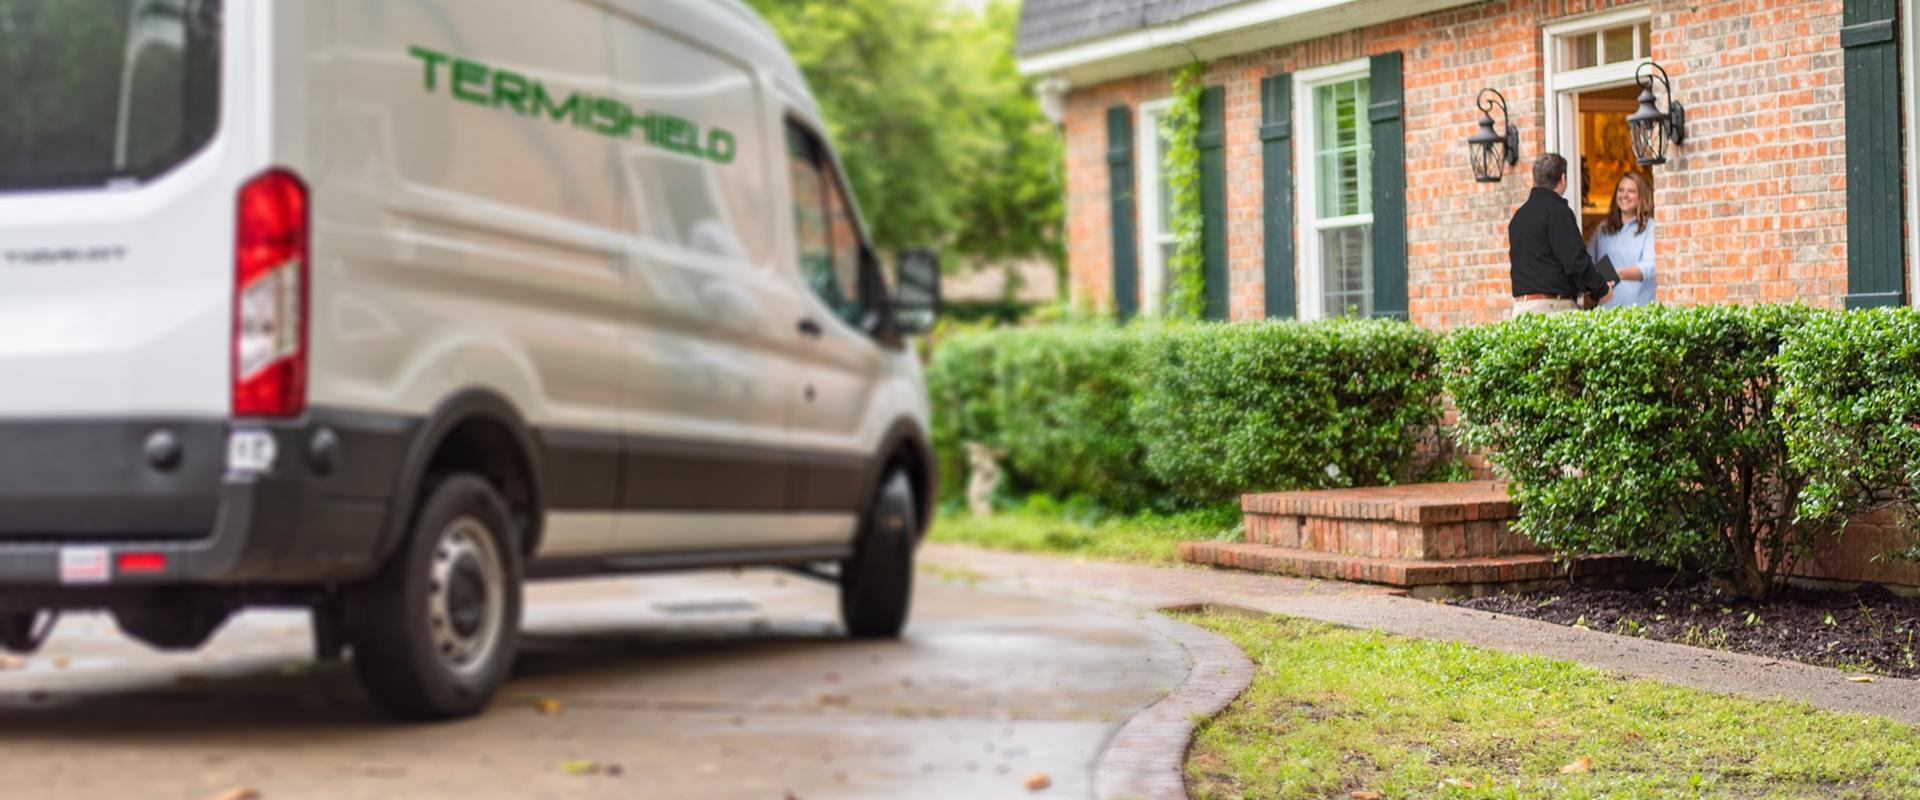 a pest control service technician arriving at a home in south bend indiana